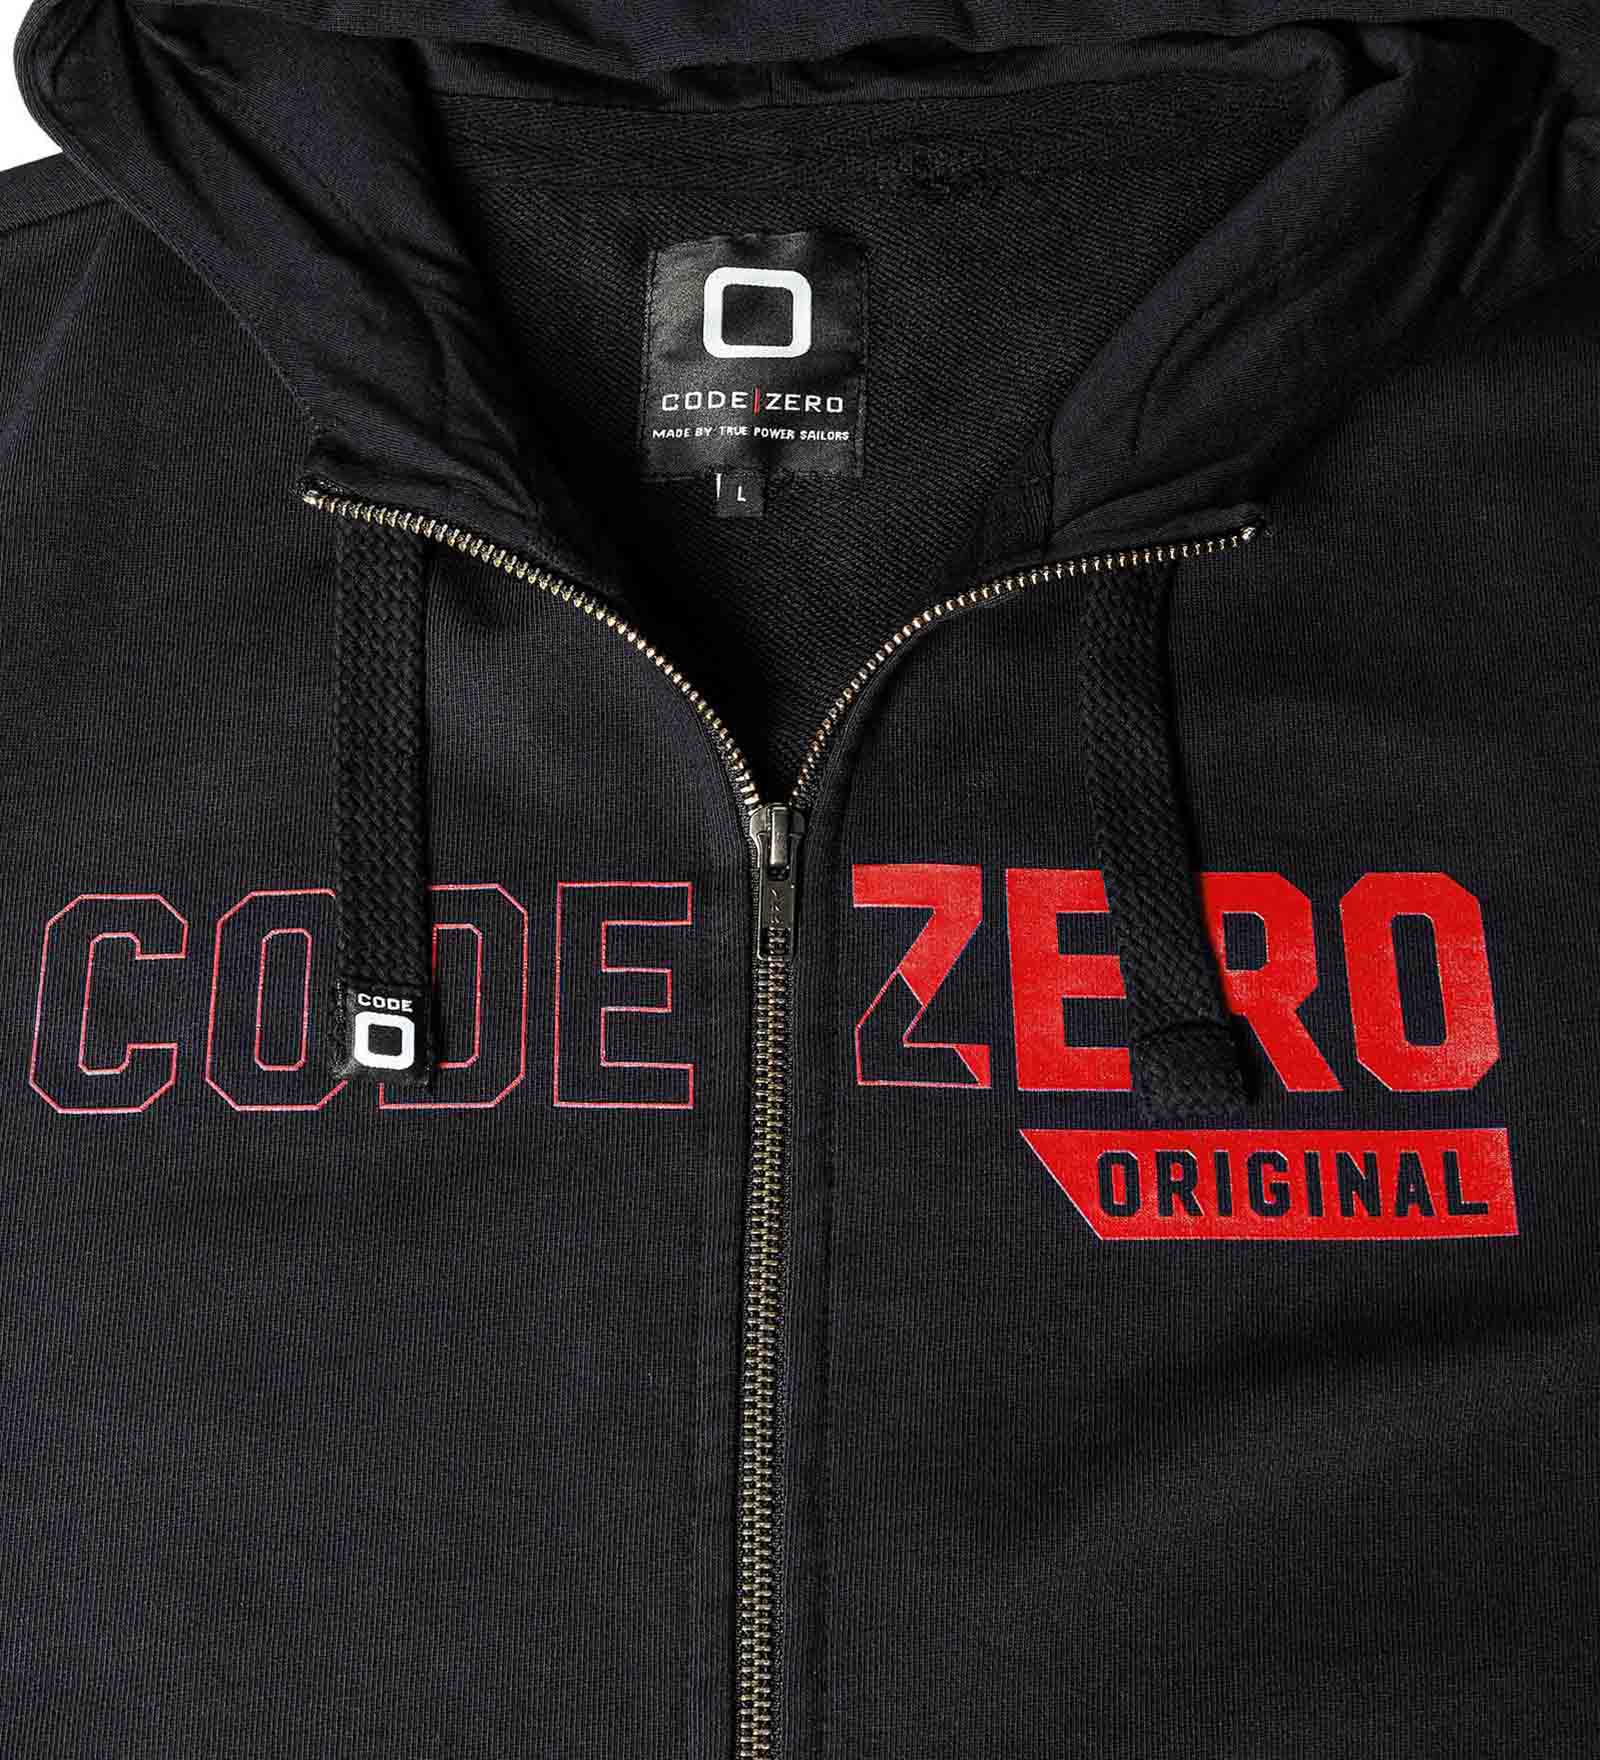 Red logo and a zip